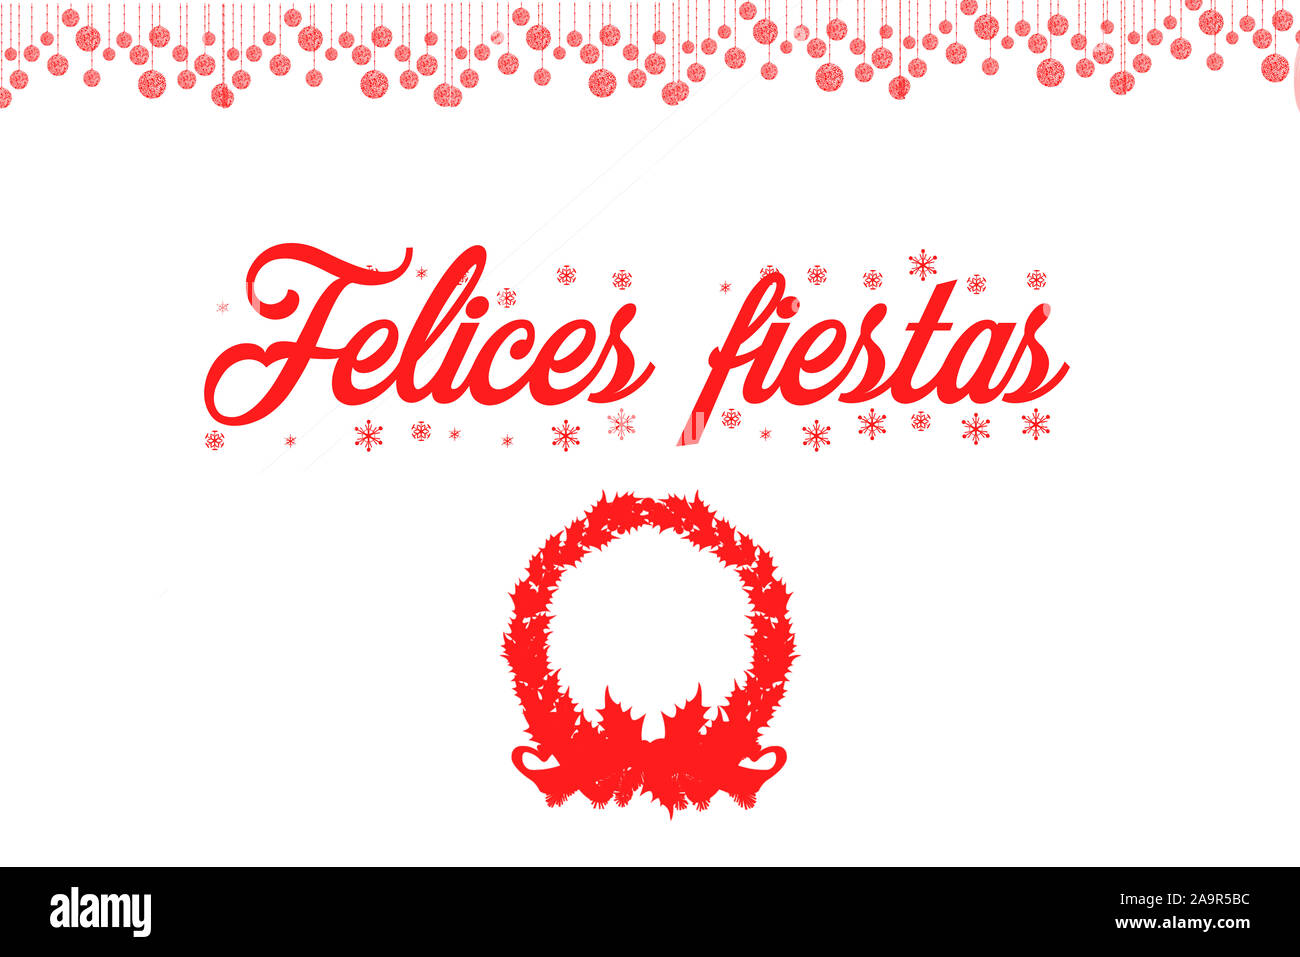 Happy Holidays in red letters on white background, decorated with a garland and Christmas balls Stock Photo